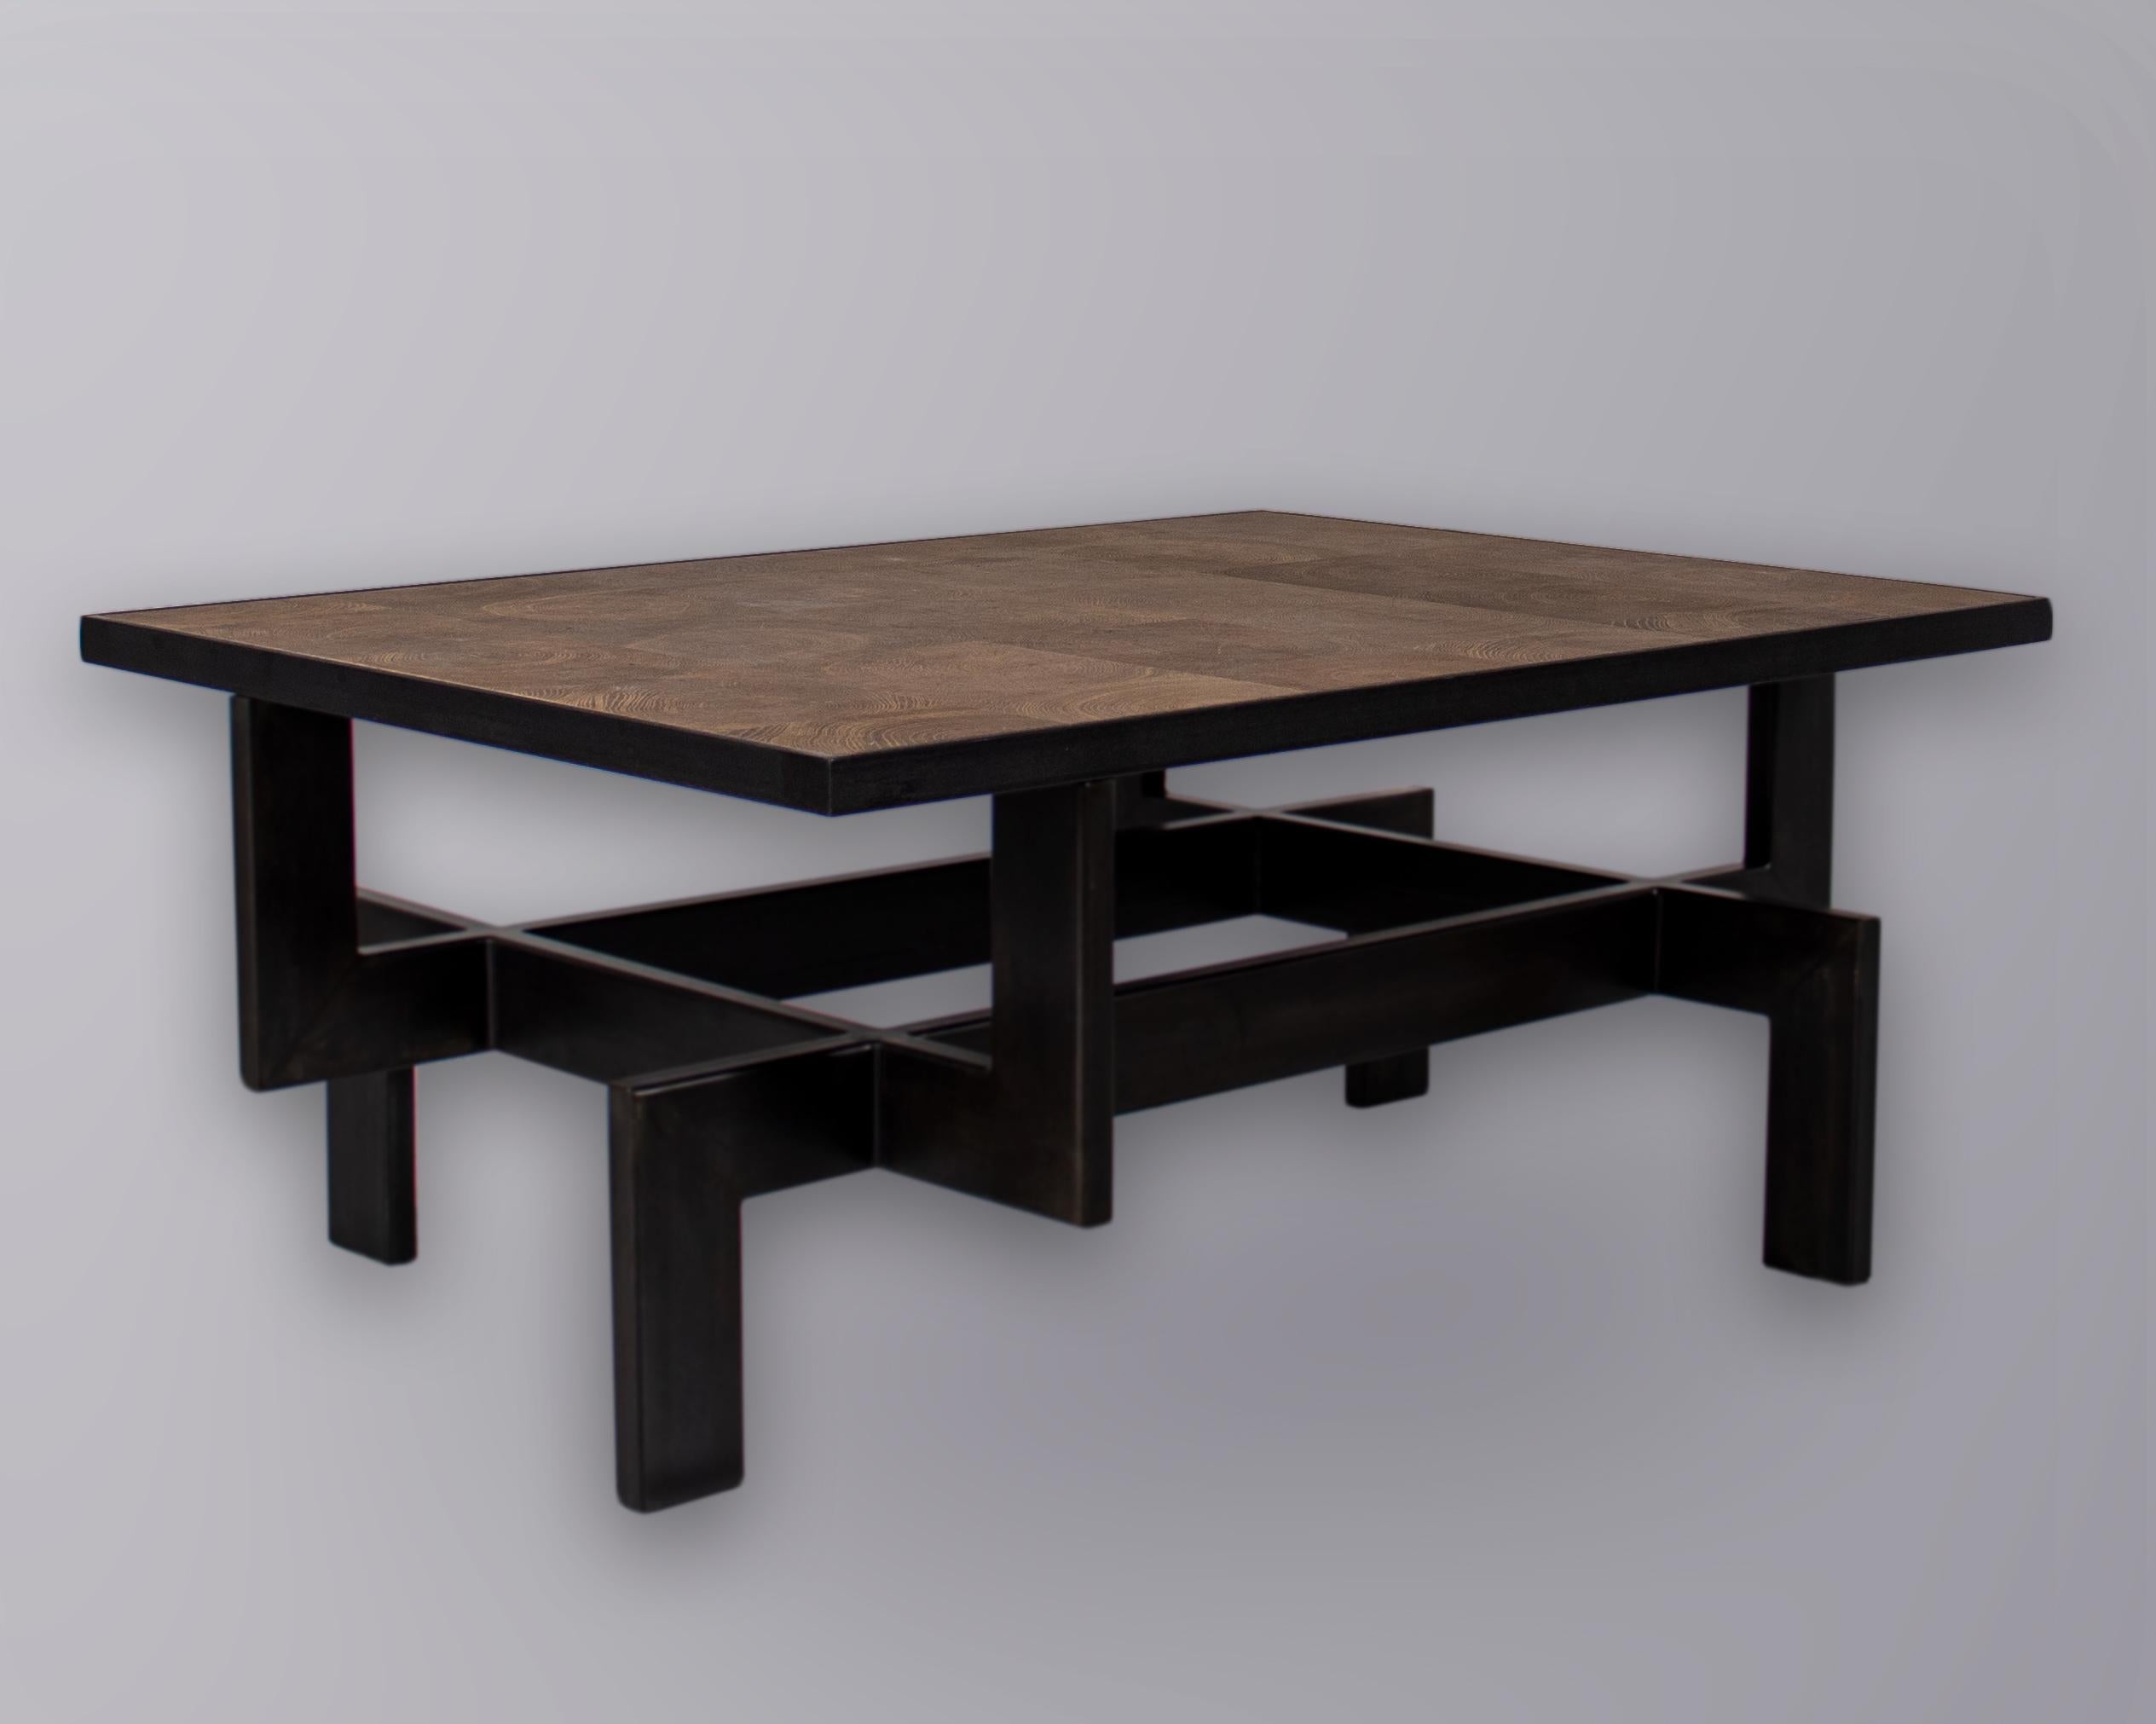 Black steel geometric shape coffee table base with natural oak top.

Designed by Brendan Bass for the Vision and Design Collection, by using high quality materials and textures. All materials are sourced from local vendors throughout the state of